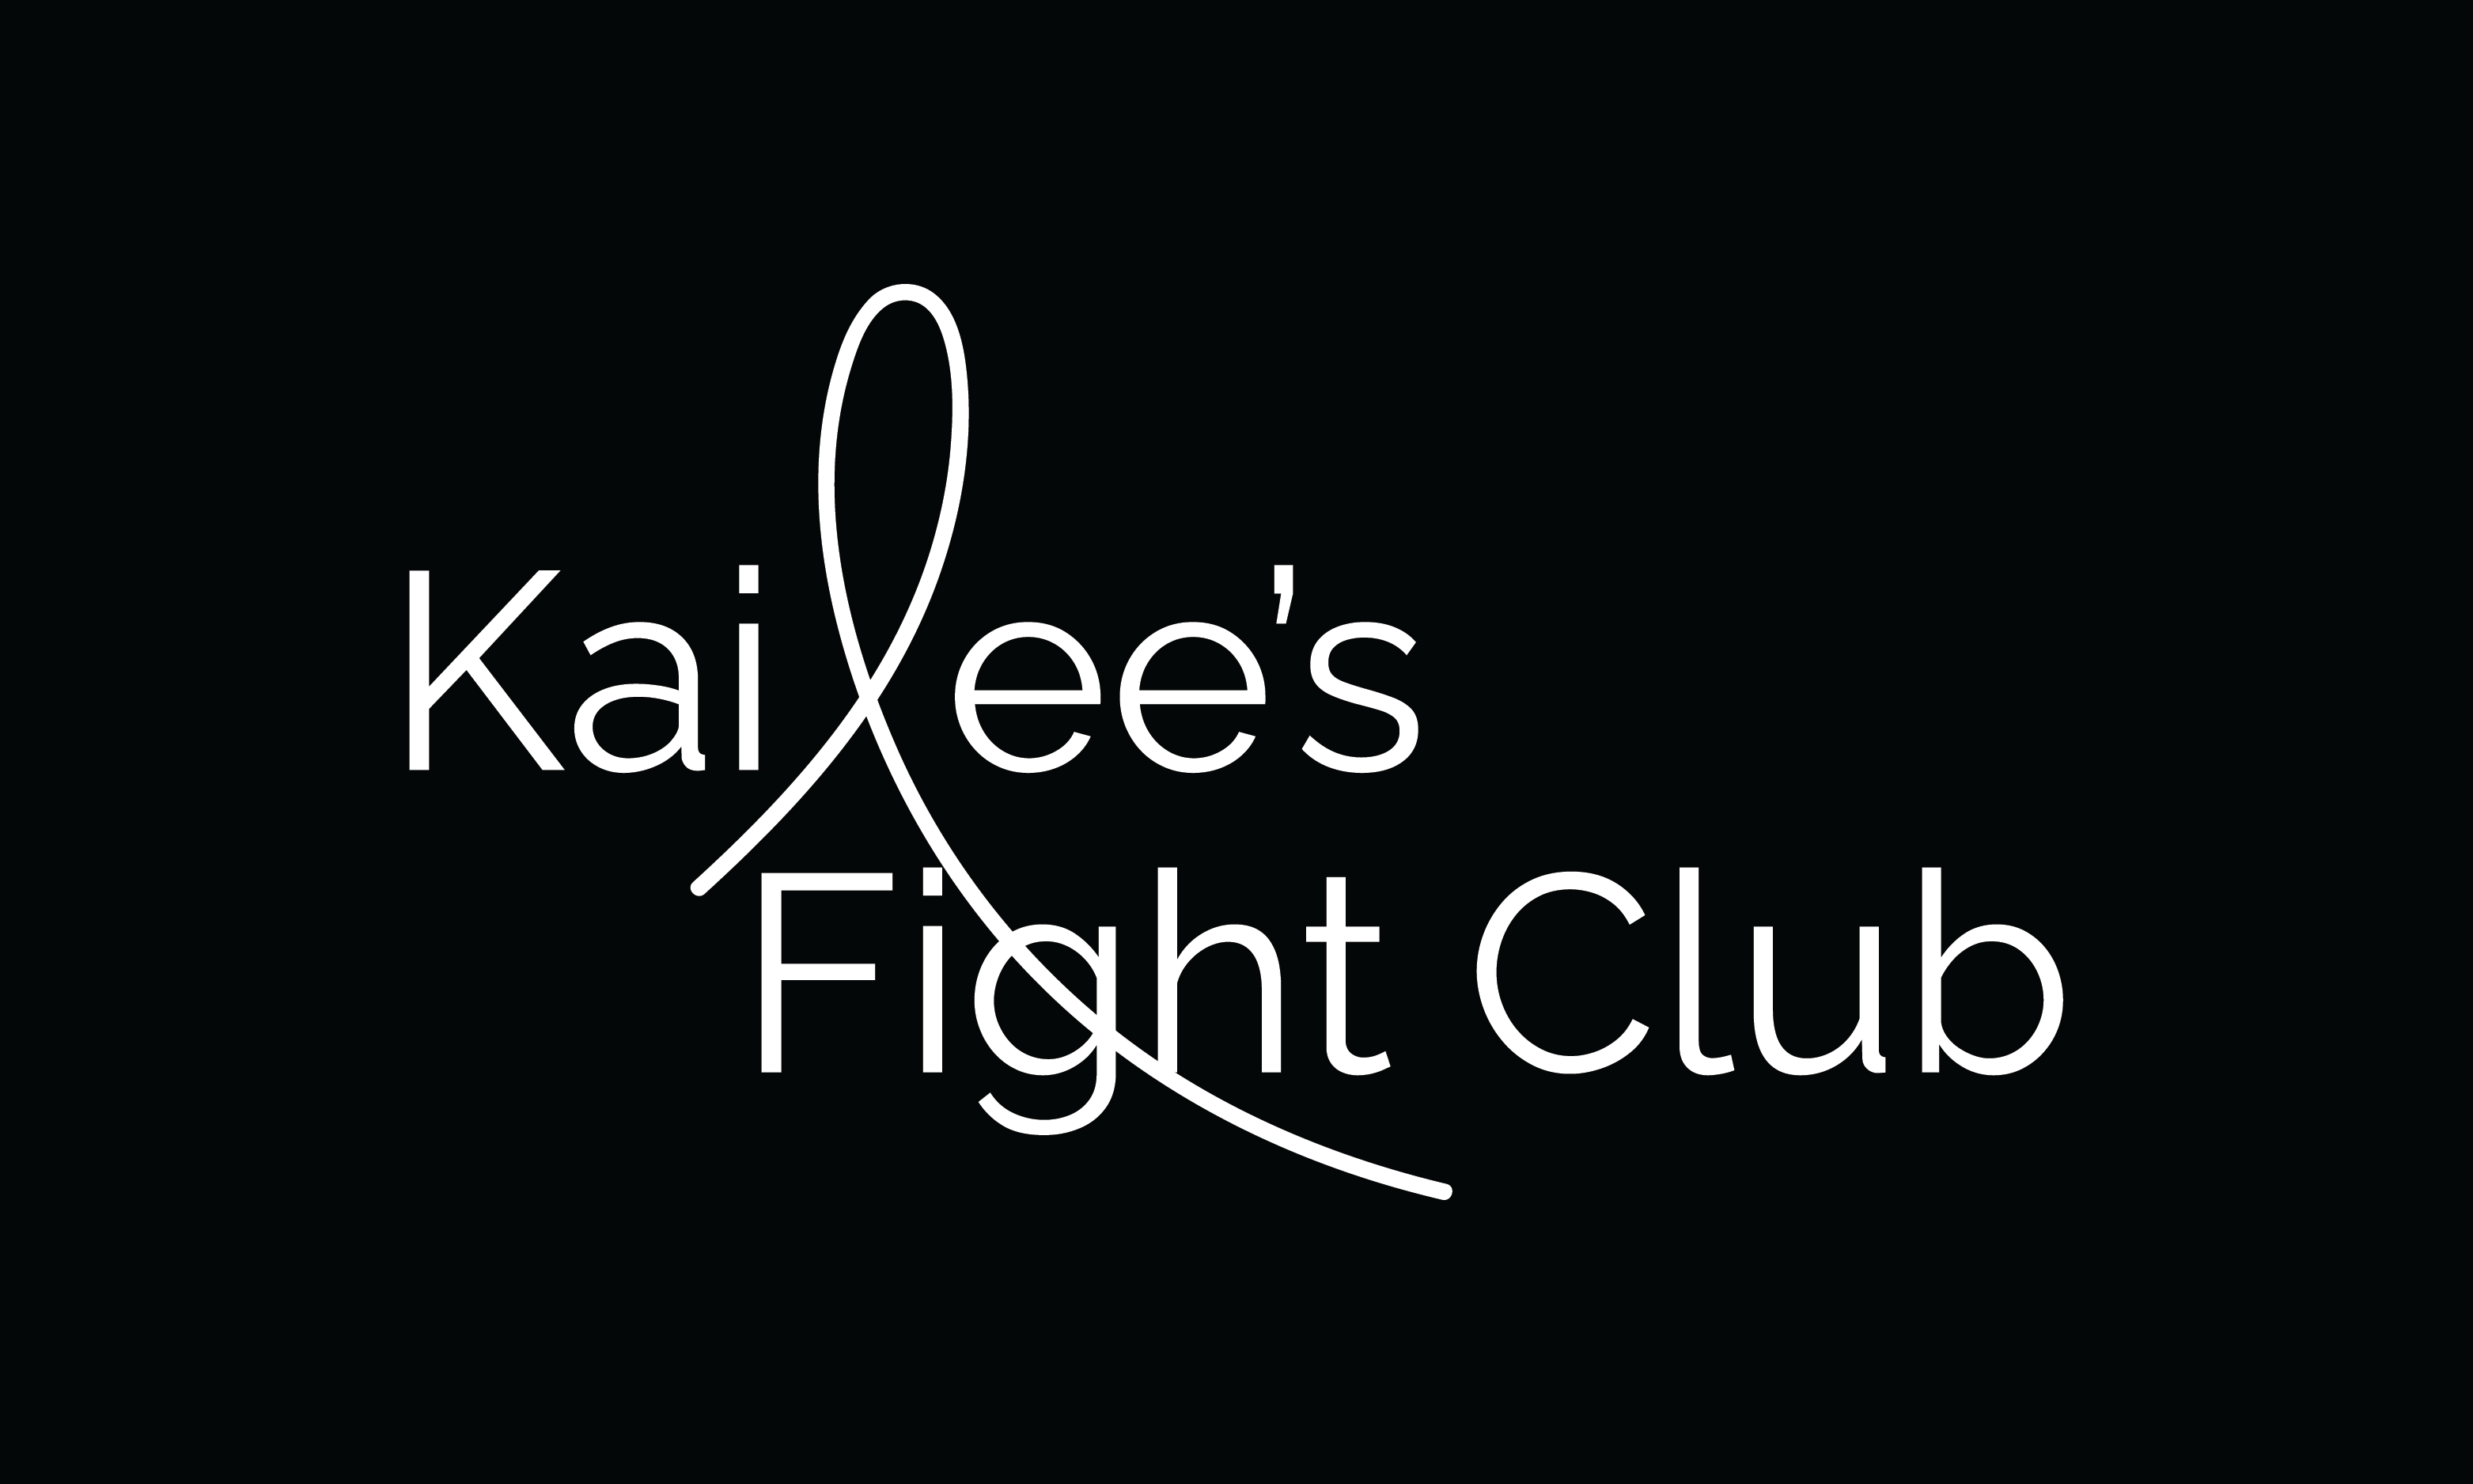 Kailee's Fight Club